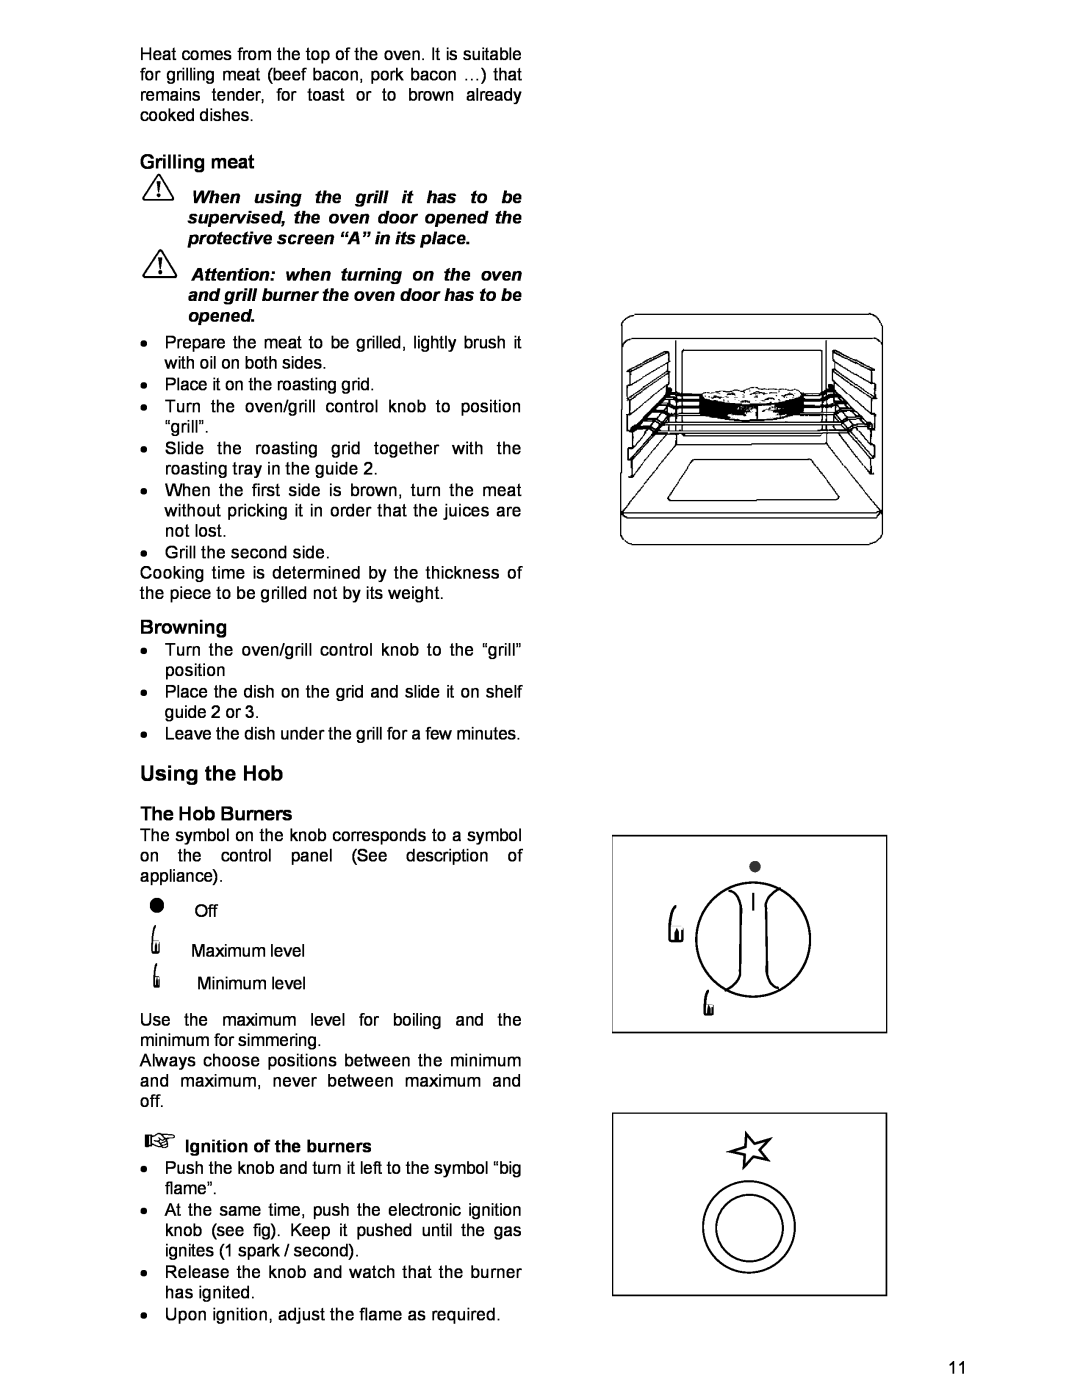 Moffat GSC 5061 manual Using the Hob, Grilling meat, Browning, The Hob Burners 